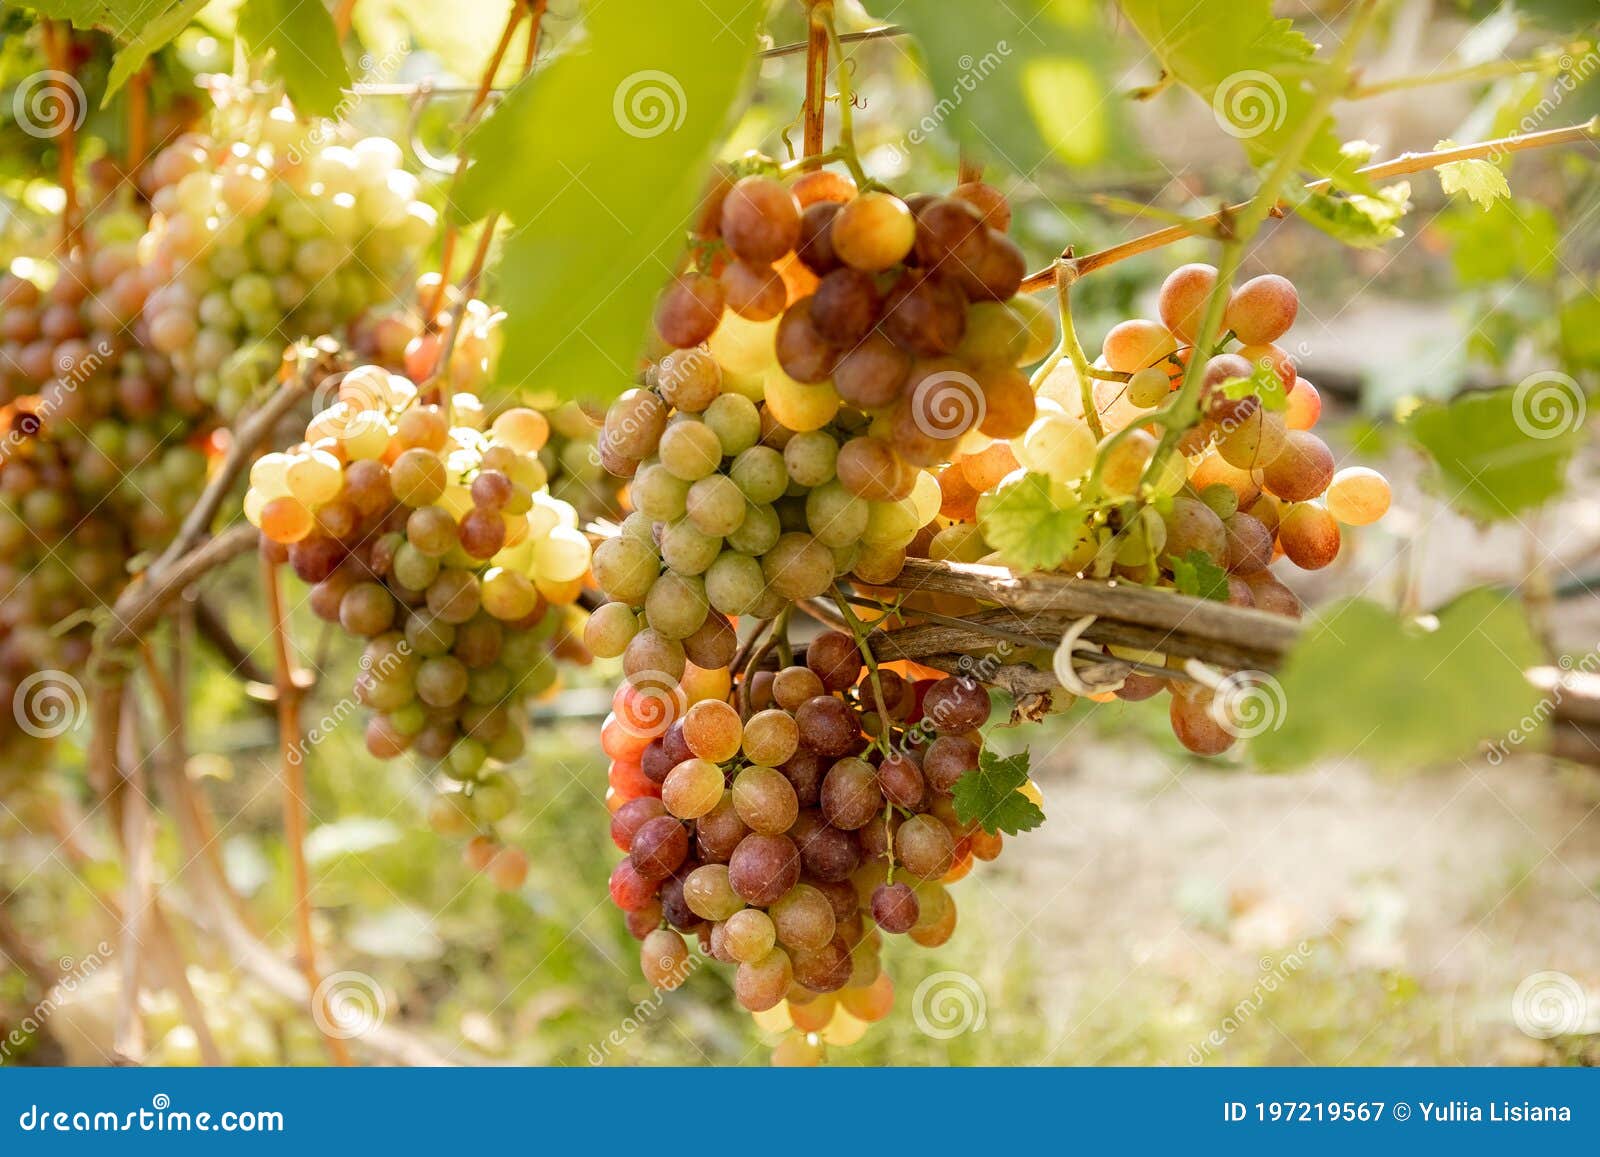 large bunche of red wine grapes hang from a vine. ripe grapas